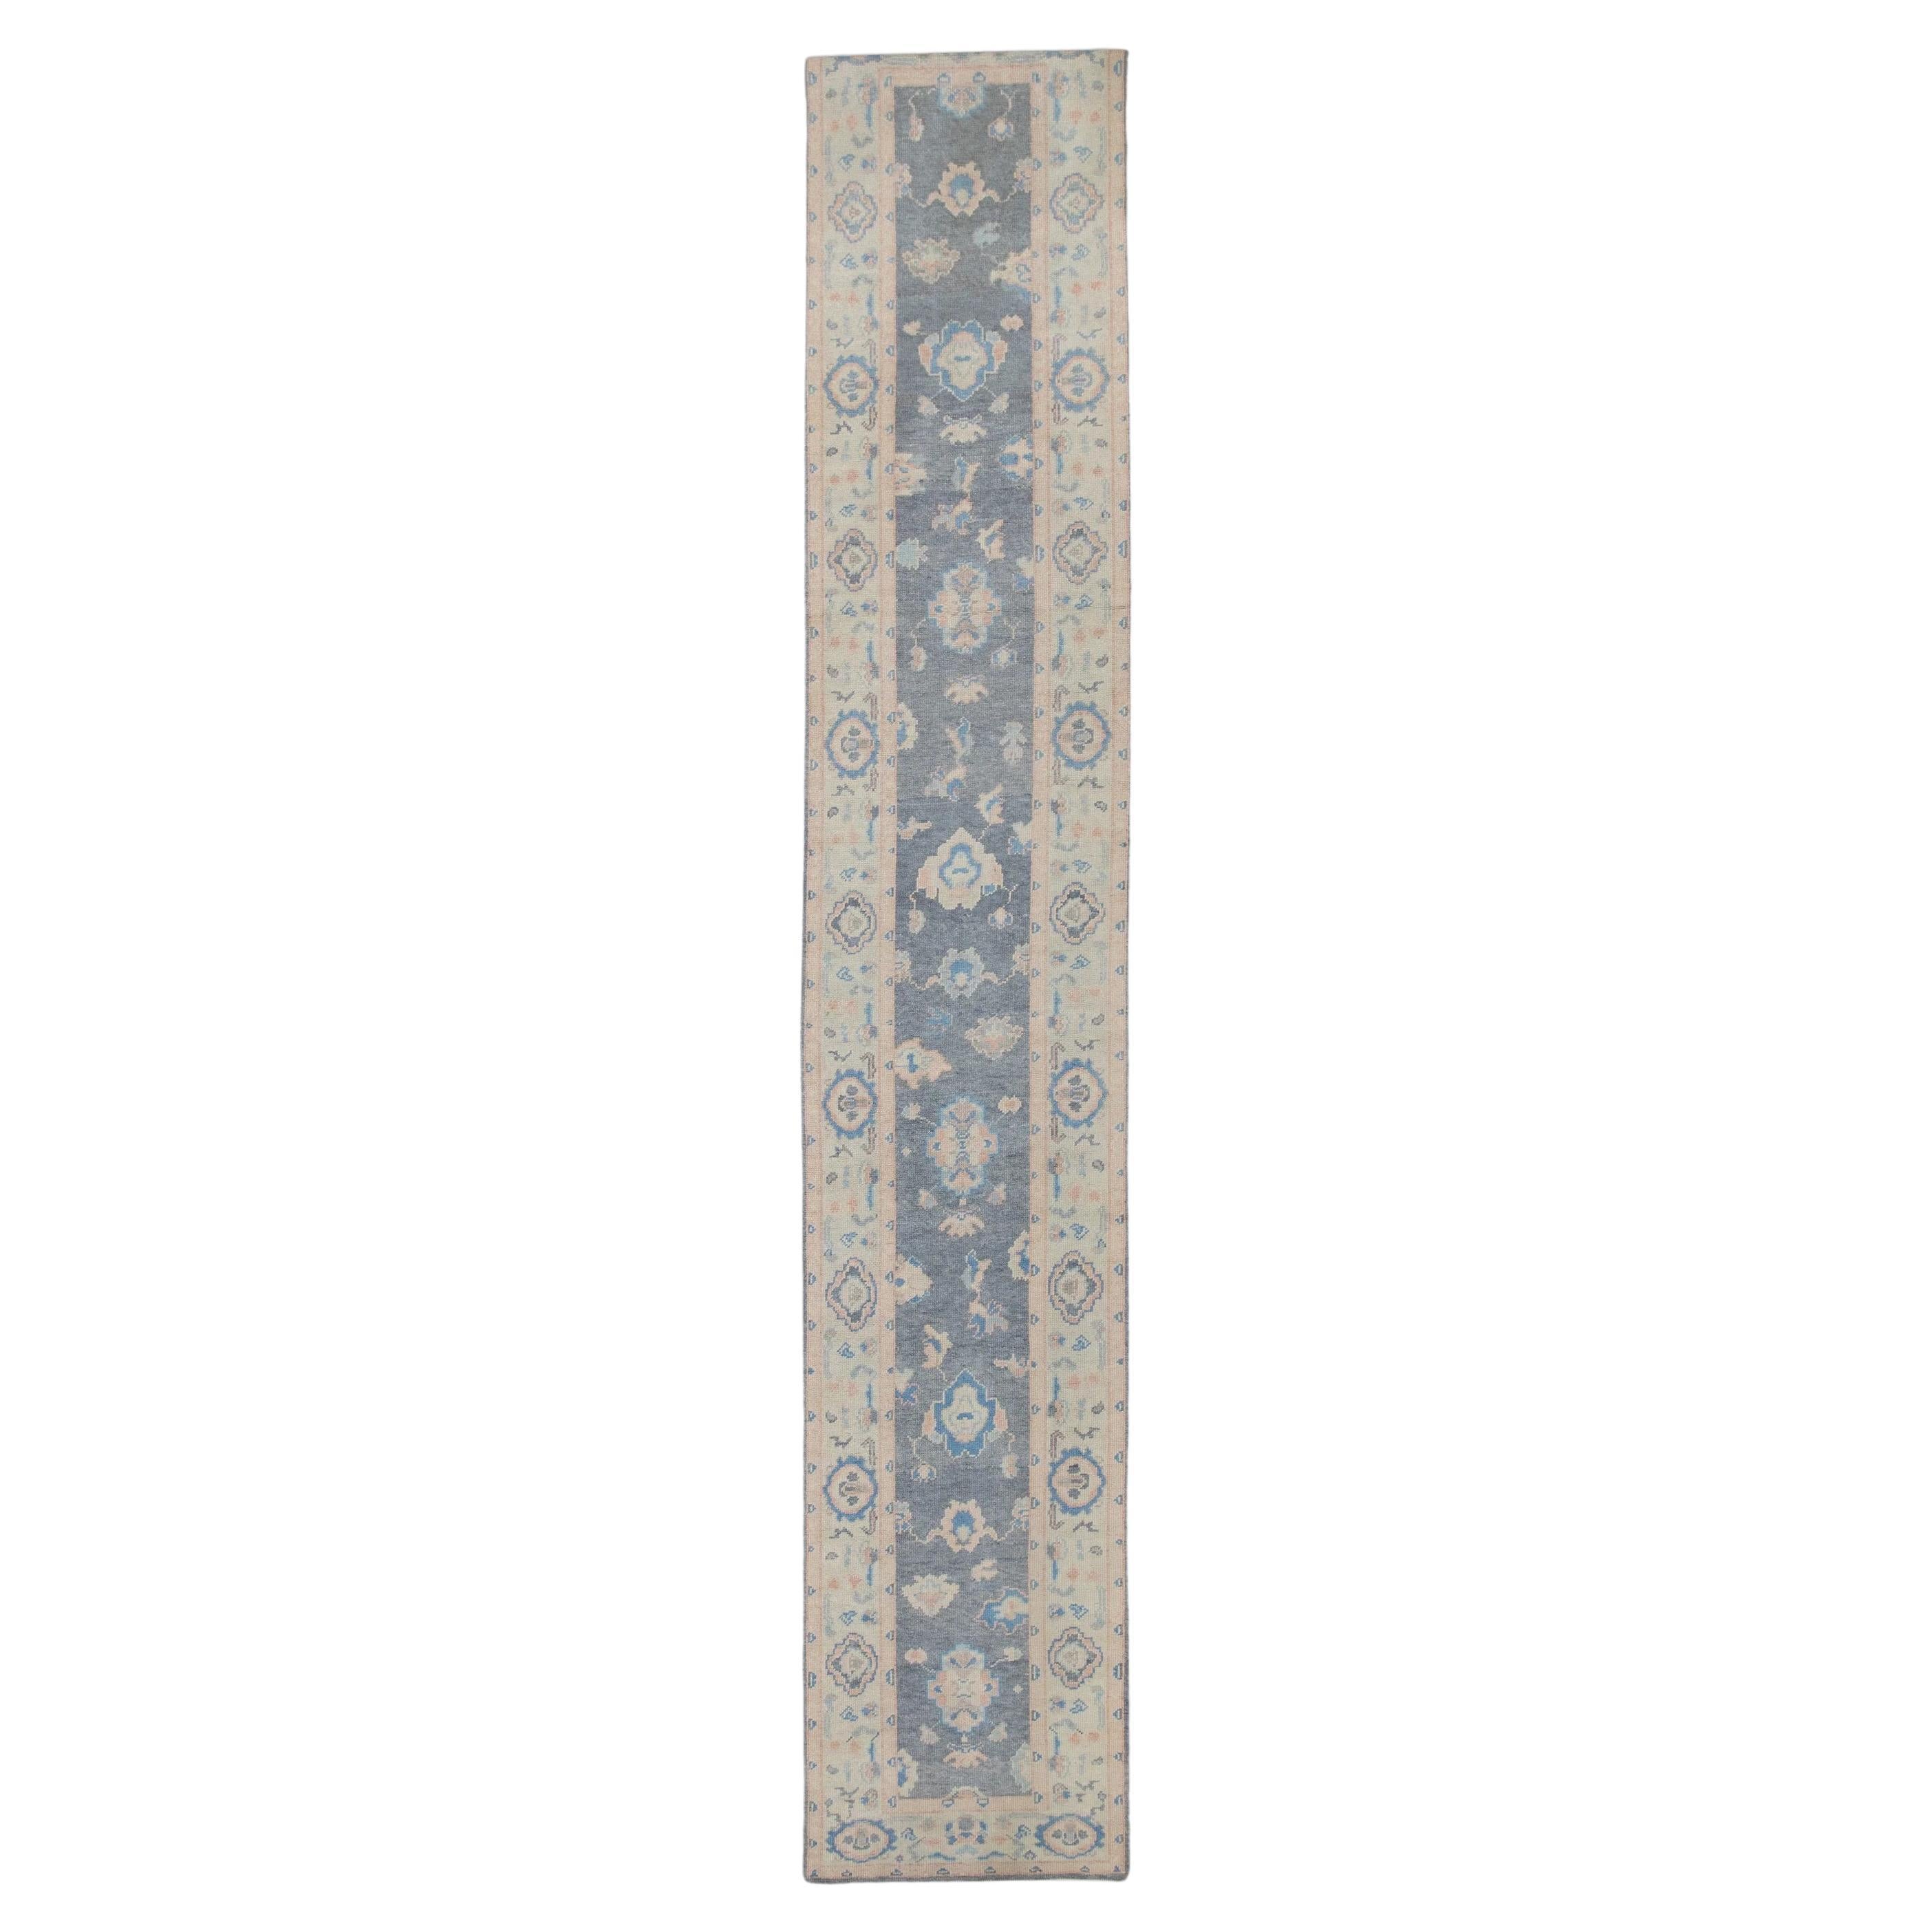 Salmon Pink & Blue Floral Handwoven Wool Turkish Oushak Runner 2'11" X 17' For Sale